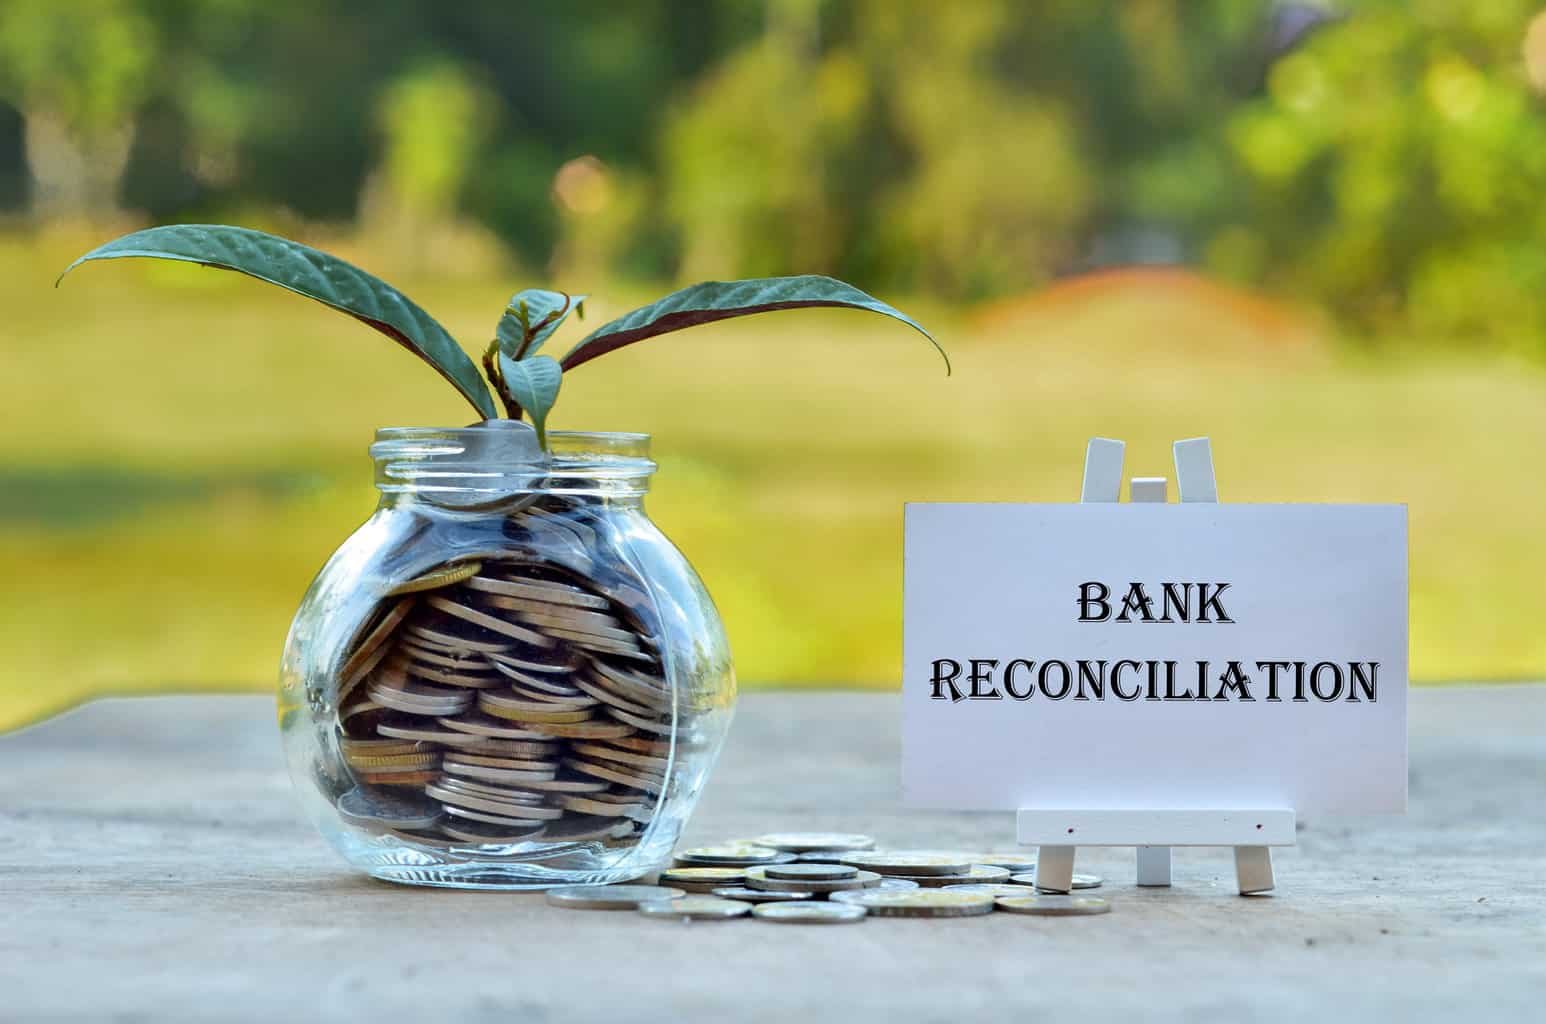 Reconciliation Quickbooks Online: How To Guide